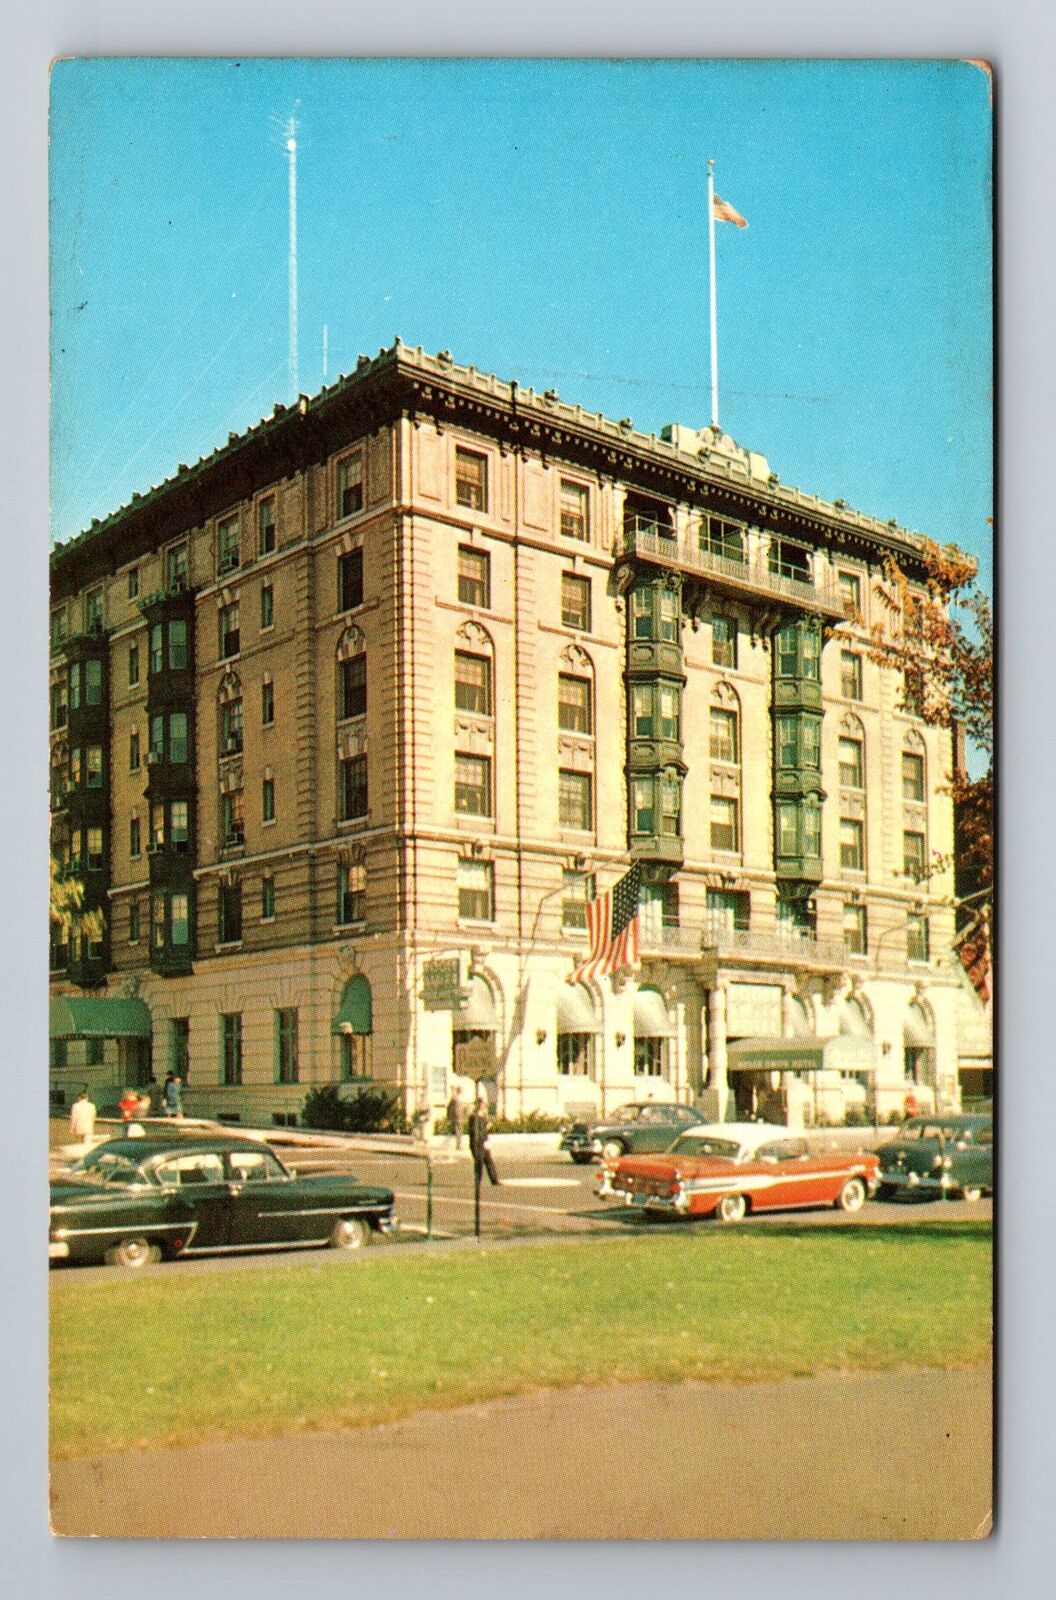 Waterbury CT-Connecticut, The Roger Smith Hotel, Advertisment, Vintage Postcard